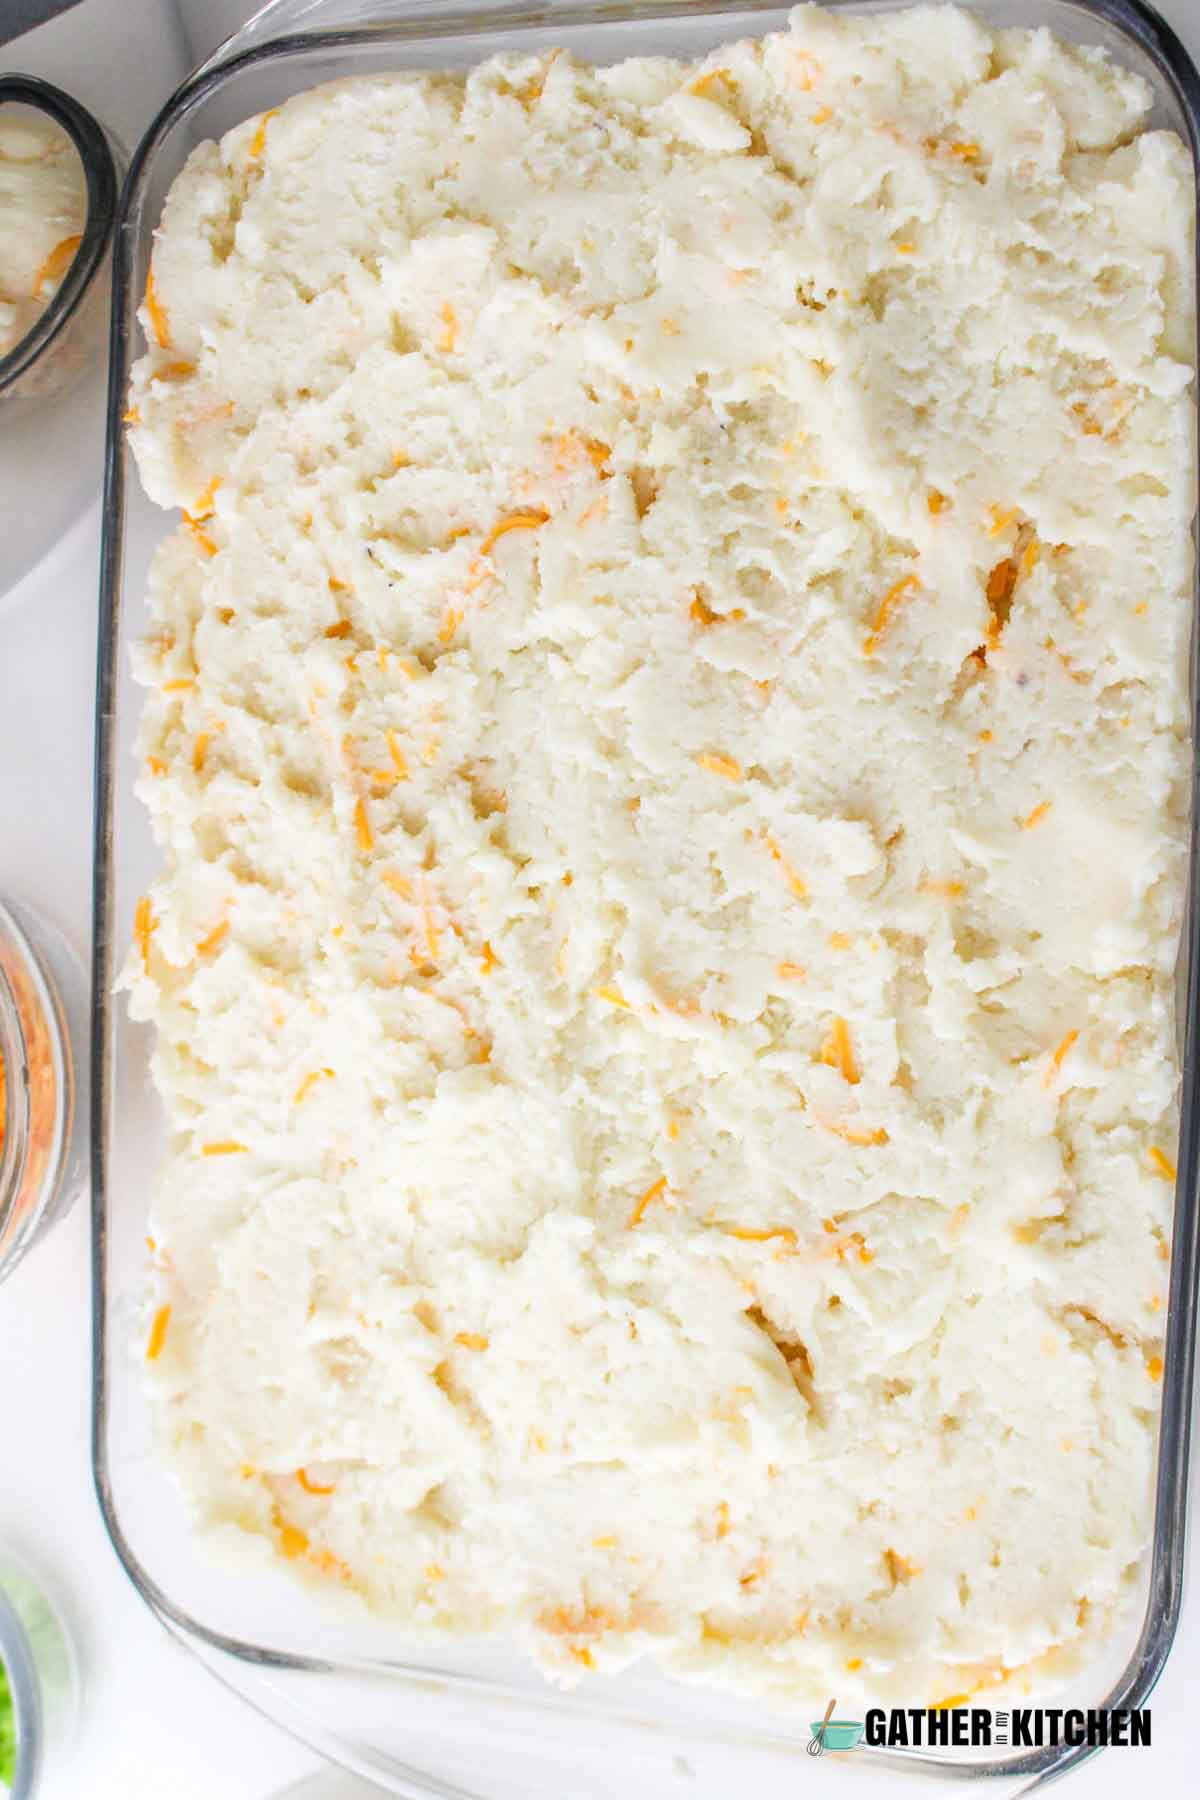 Mashed potatoes spread in baking dish.